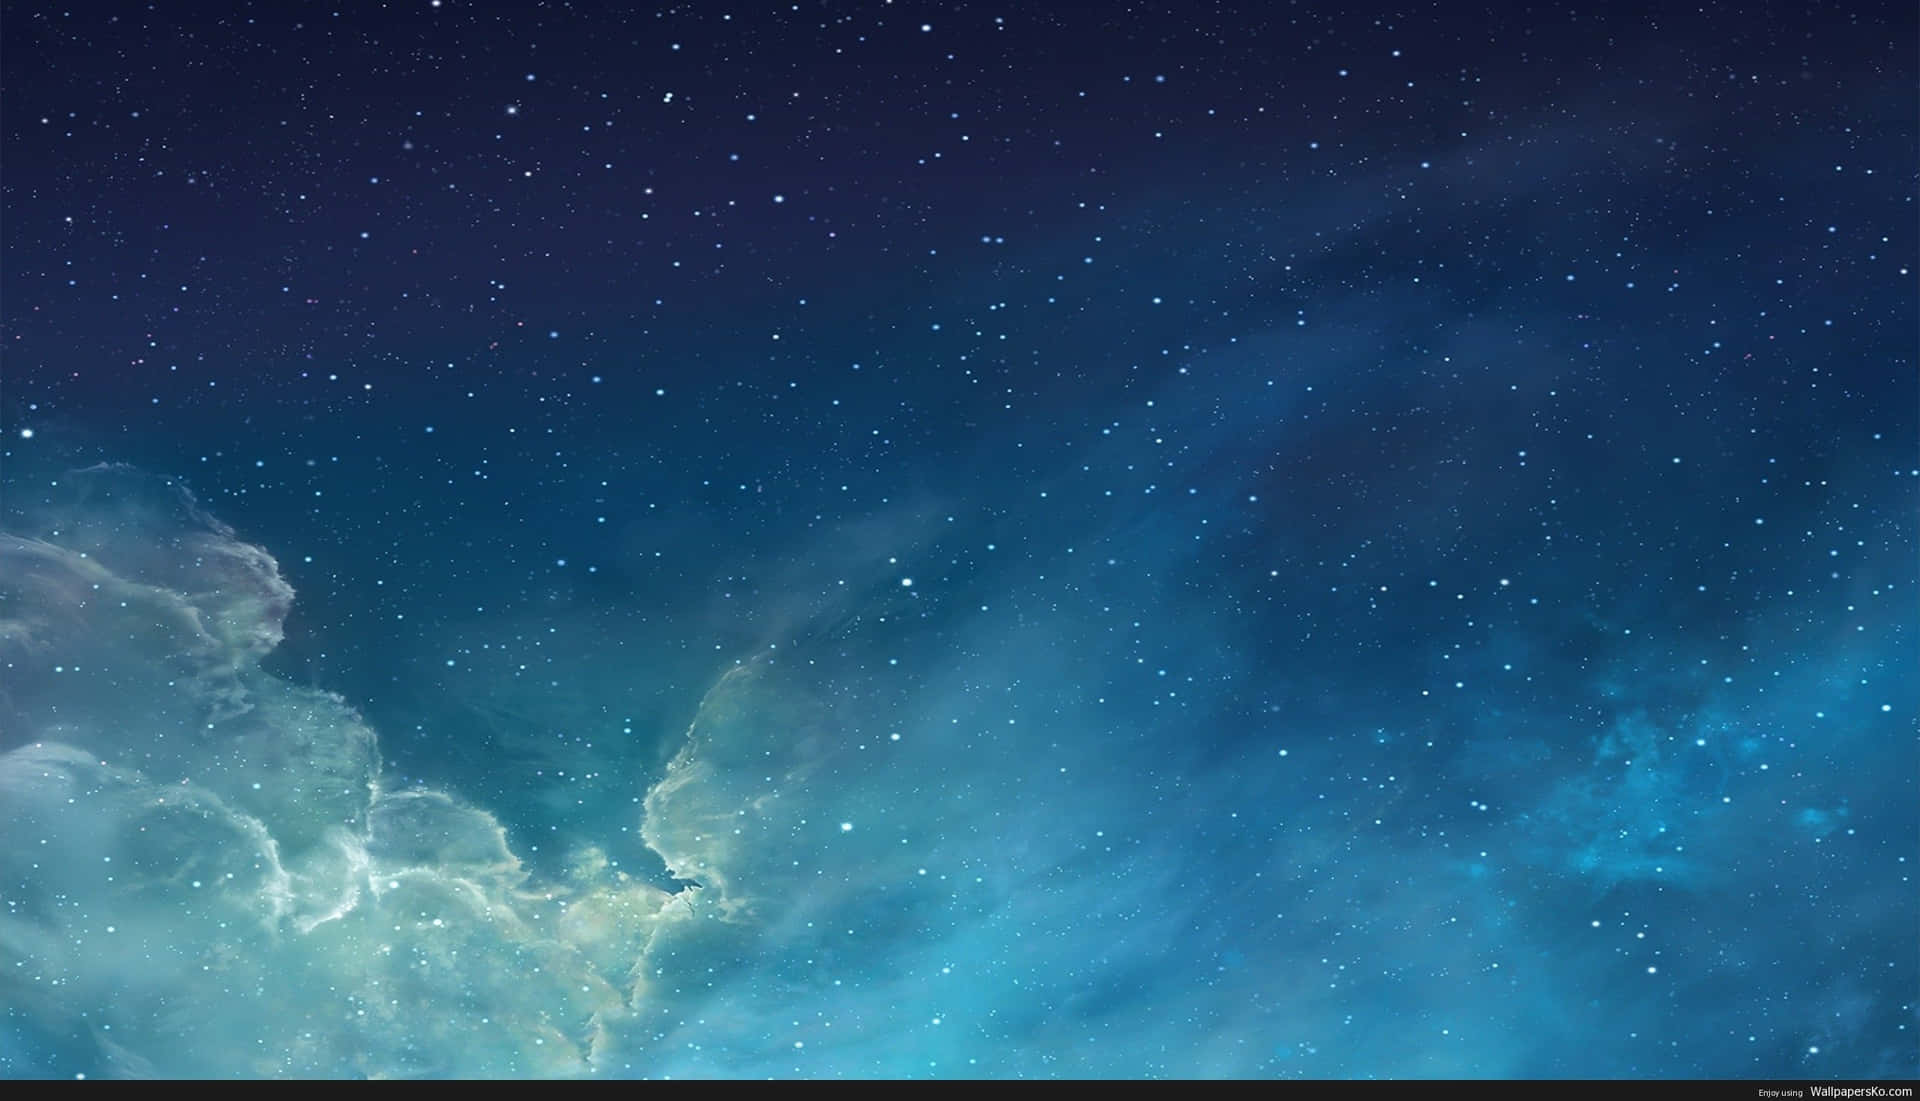 “A picturesque night sky, aglow with thousands of stars” Wallpaper